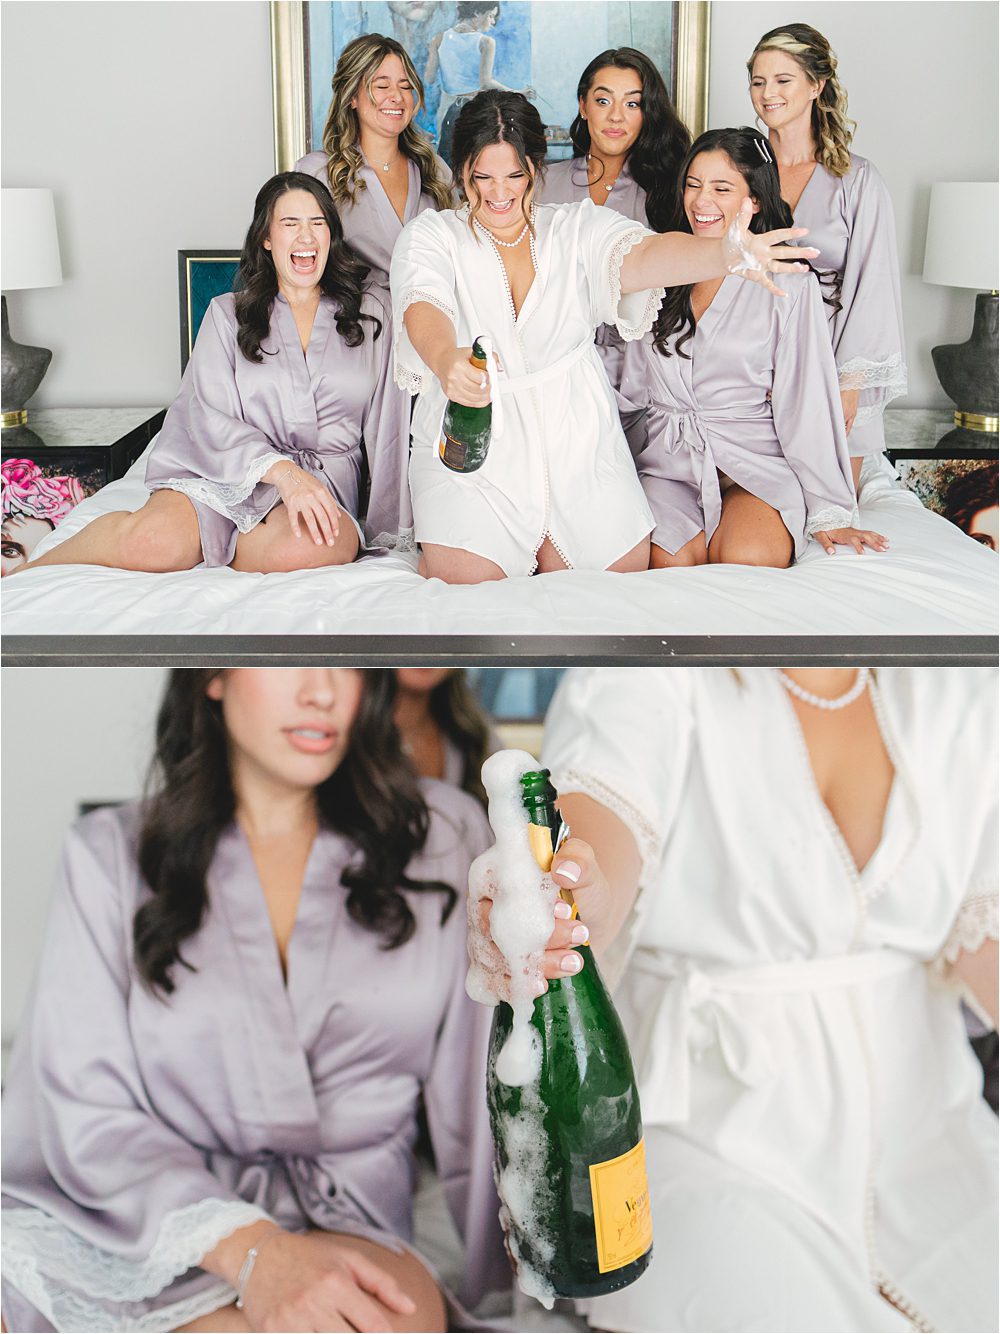 fun wedding photo of bride popping Veuve champagne